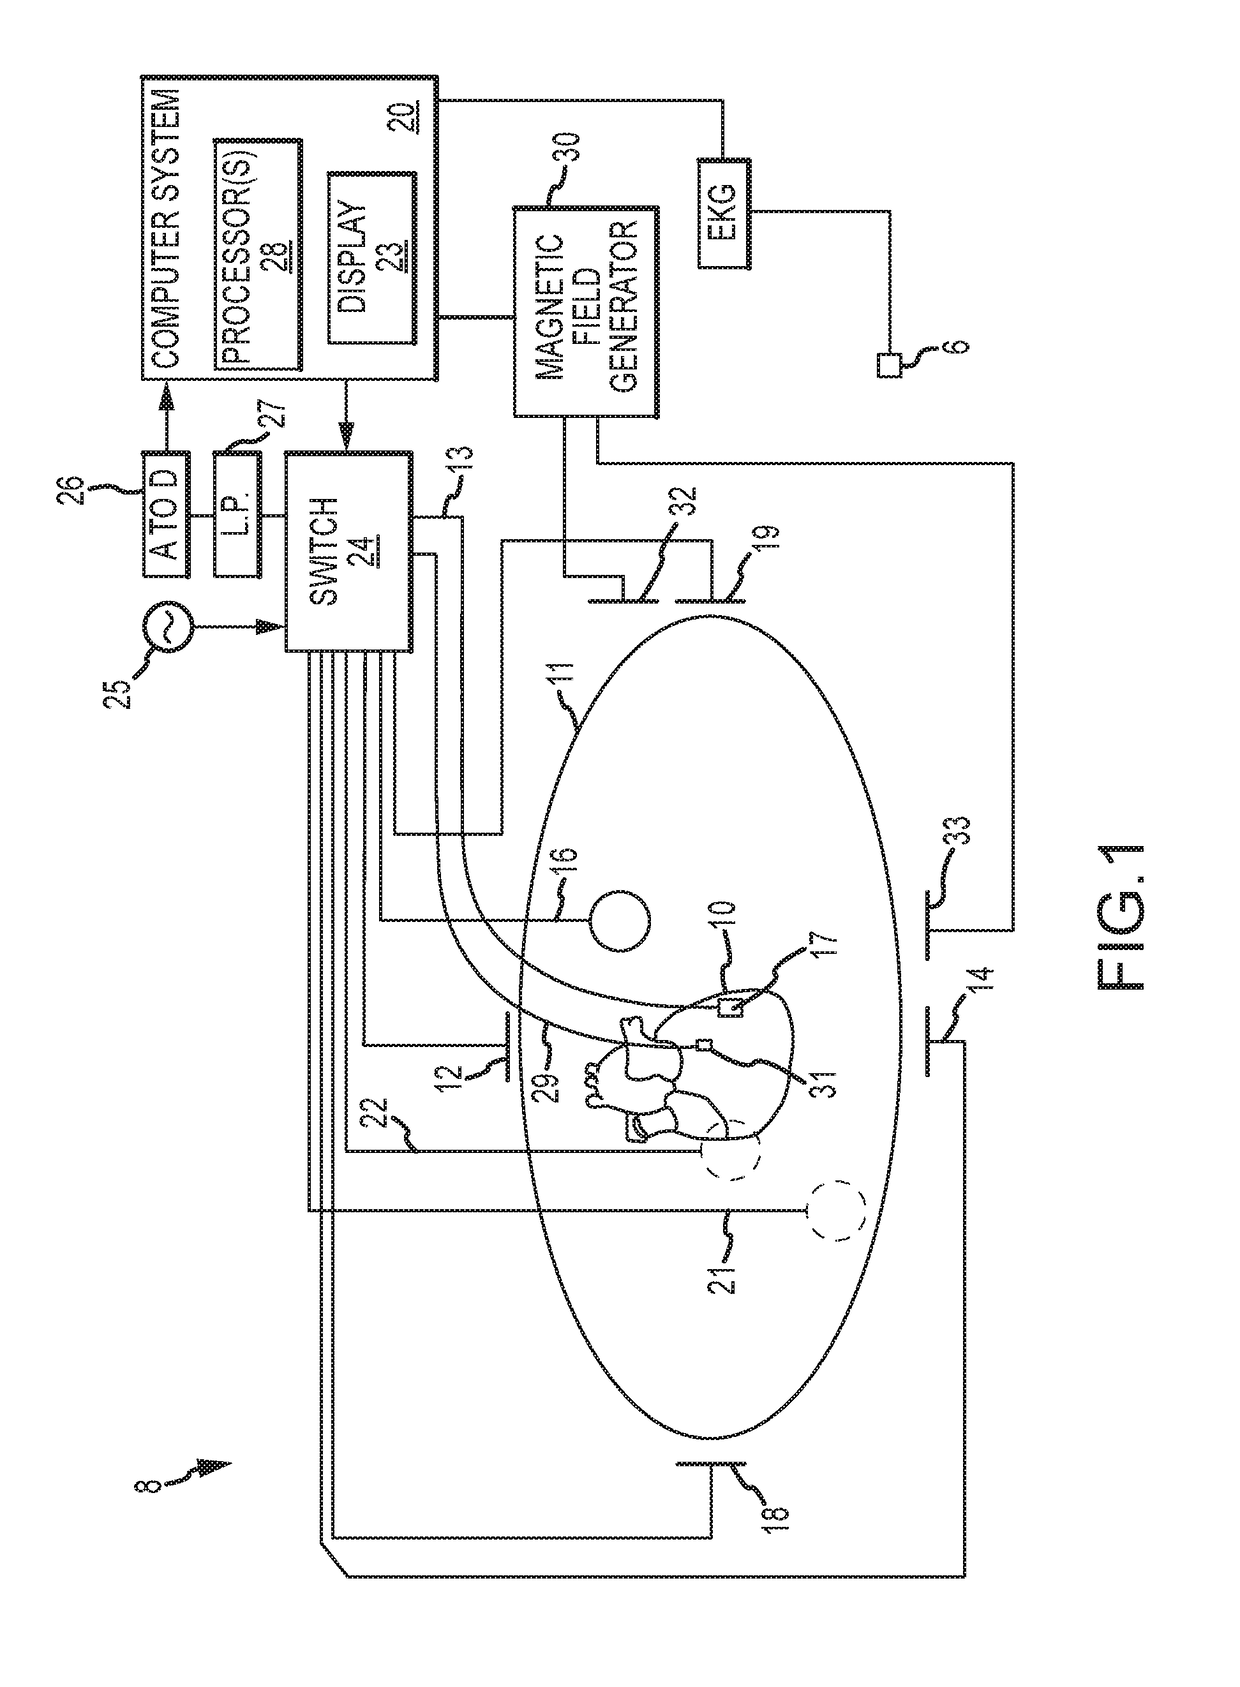 System and Method for Electrophysiology Procedures